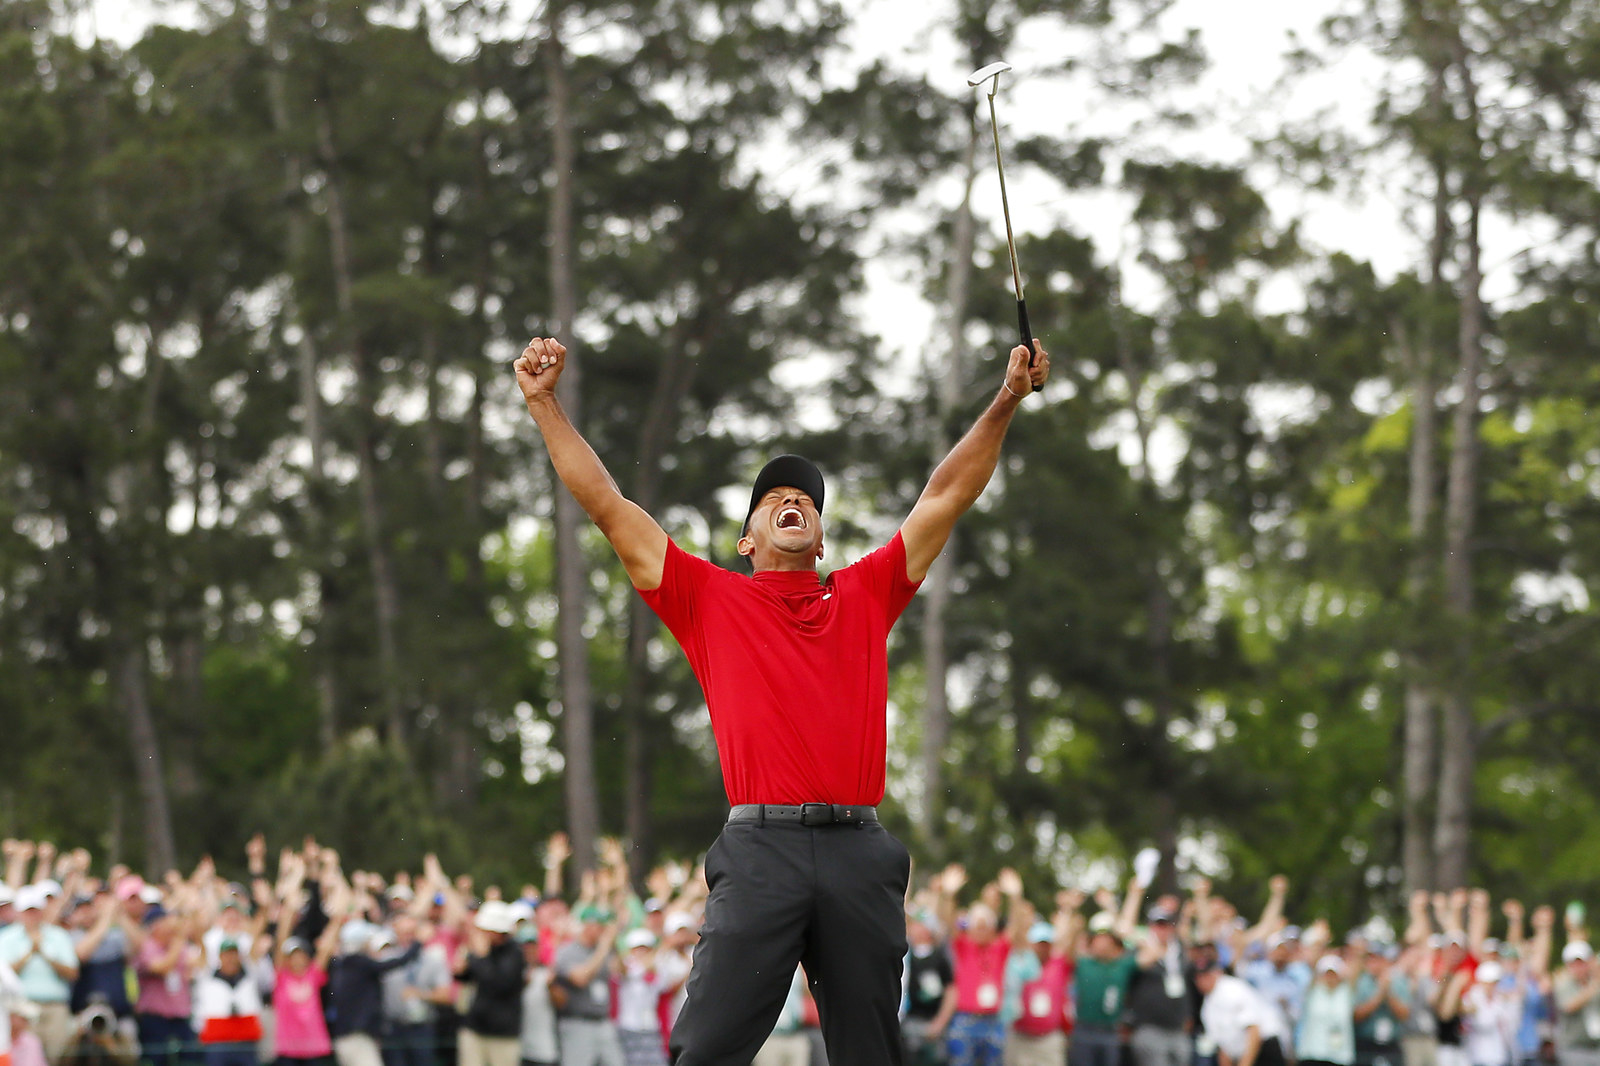 Tiger Woods Won The Masters Golf Championship